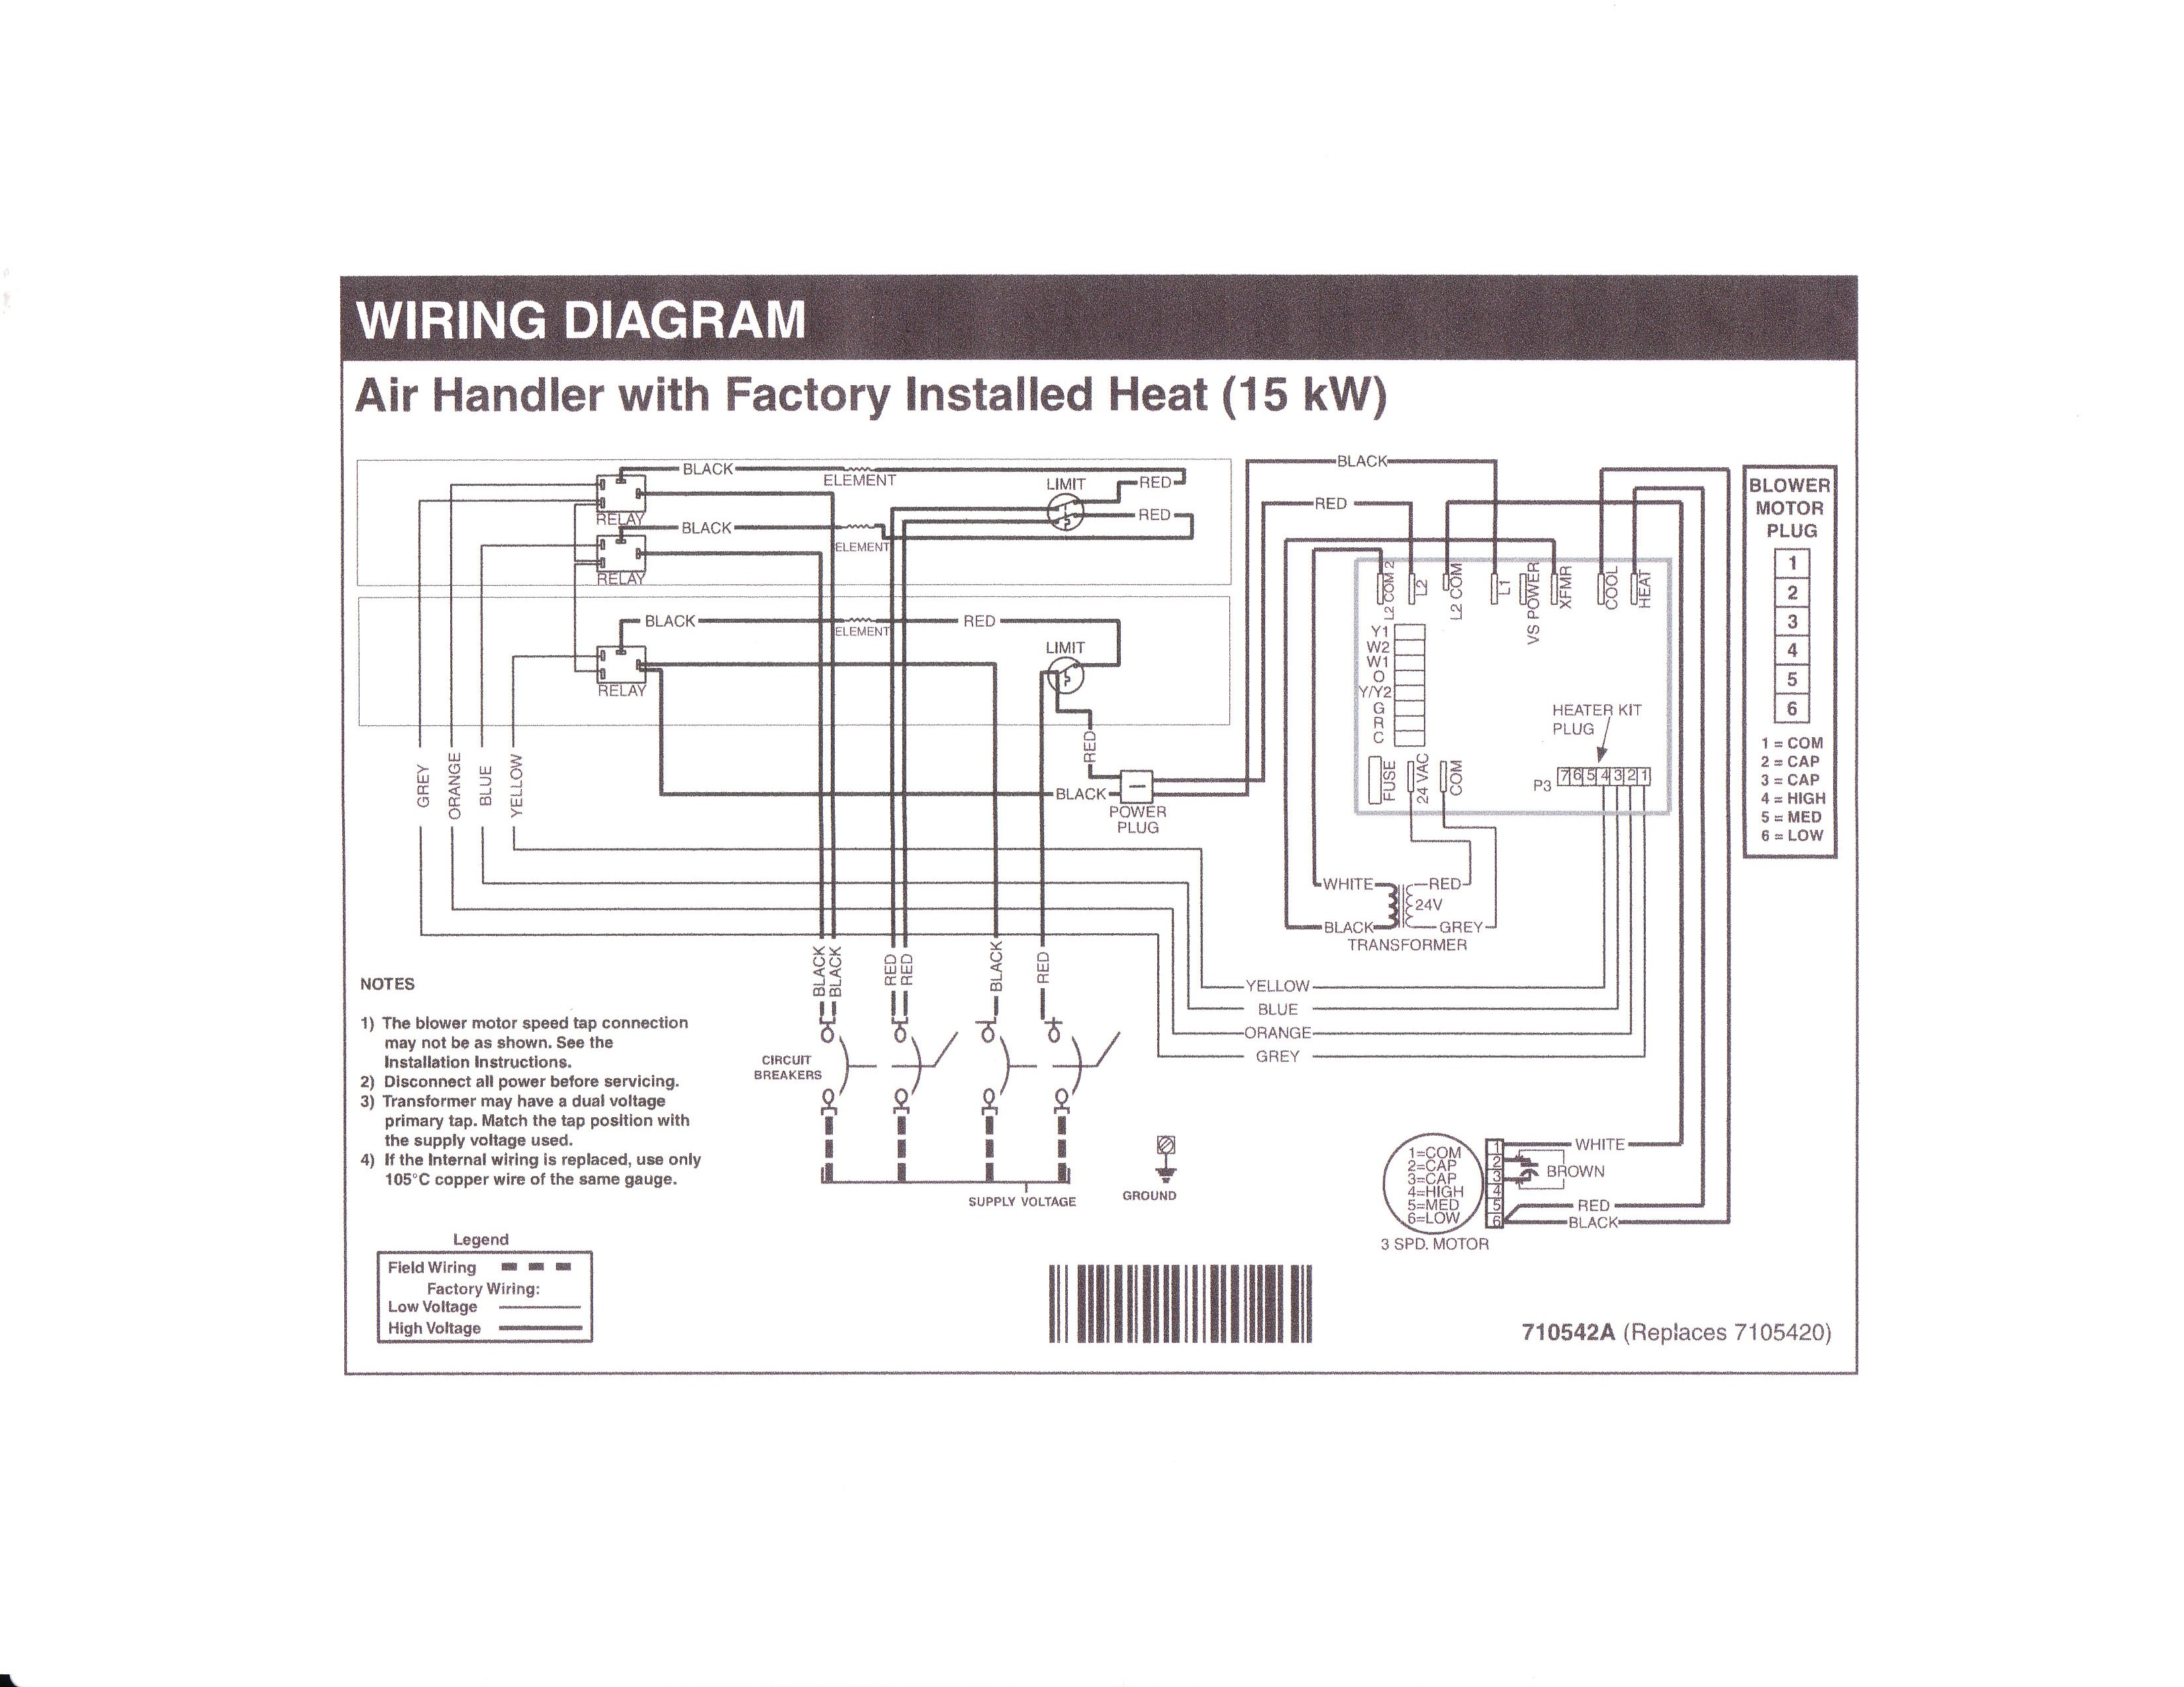 Central Electric Furnace Wiring Diagram | Wiring Diagram - Intertherm Electric Furnace Wiring Diagram